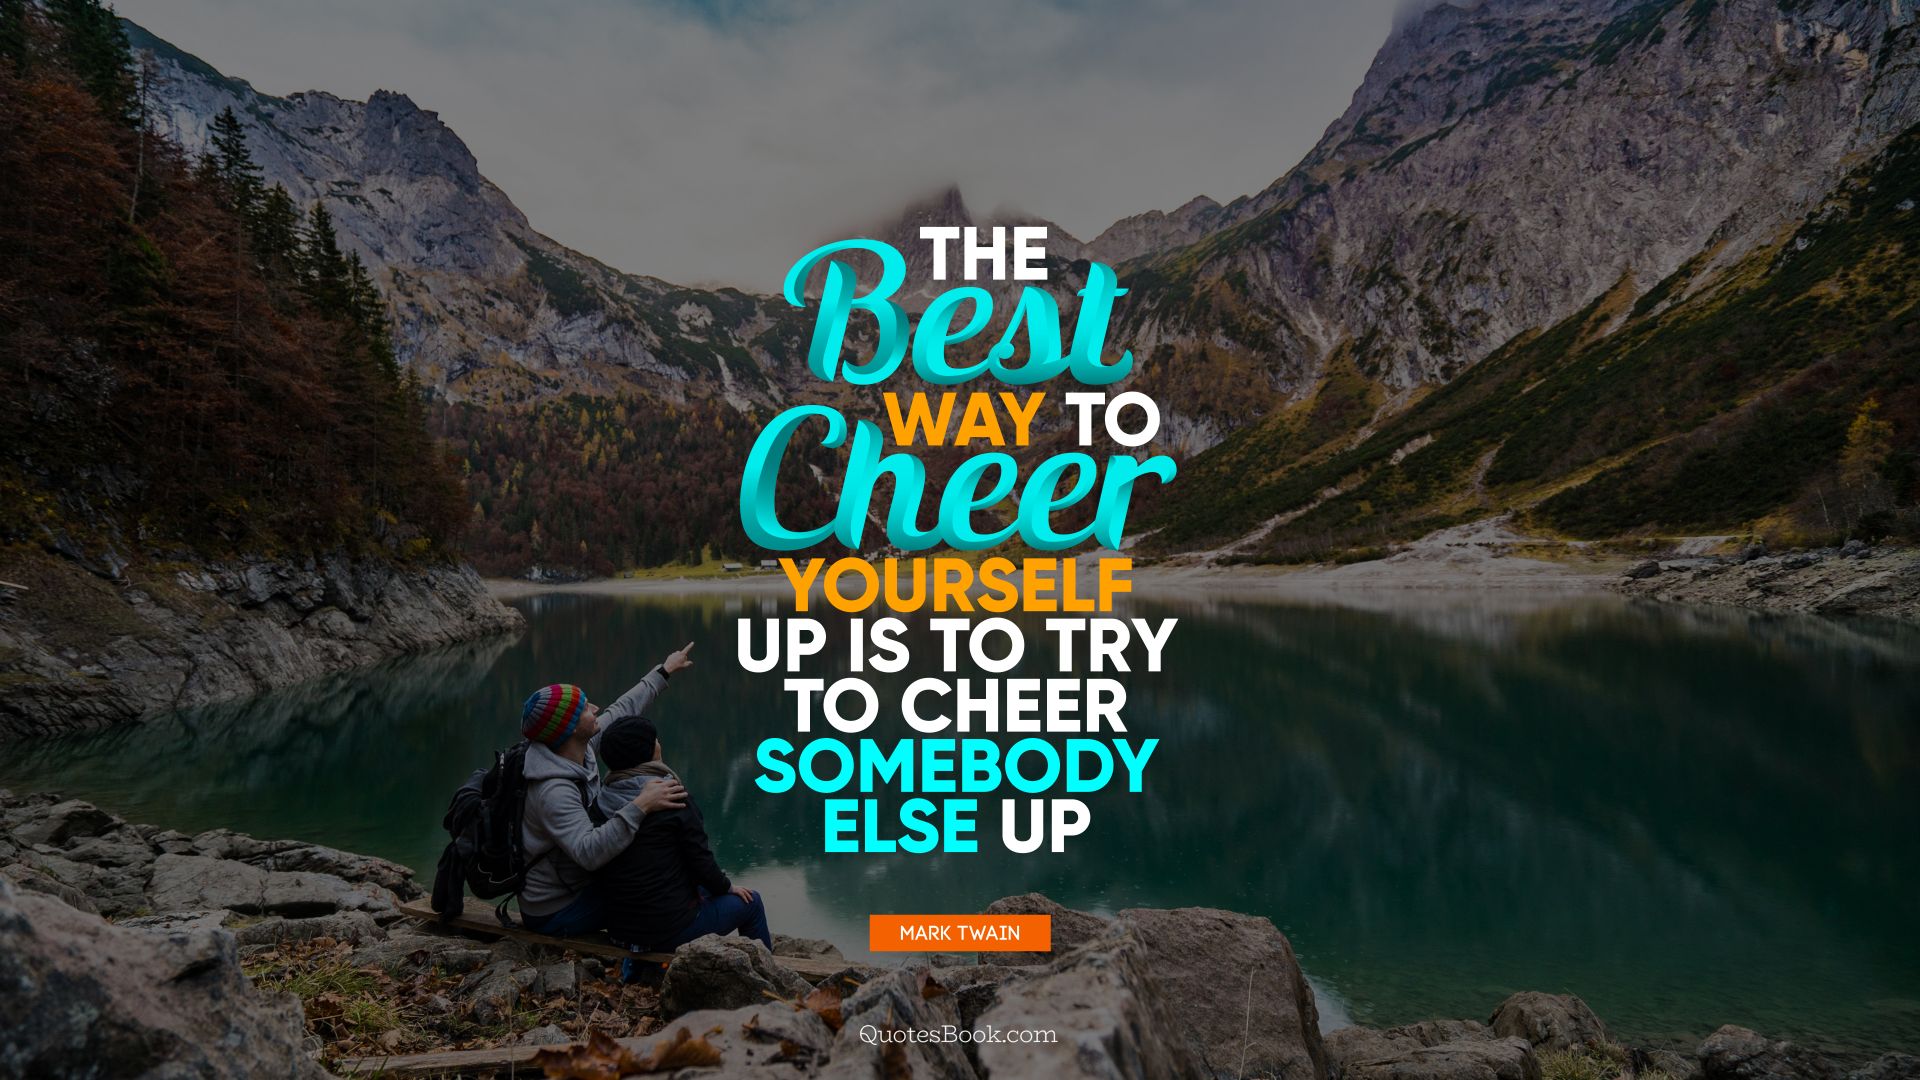 The best way to cheer yourself up is to try to cheer somebody else up. - Quote by Mark Twain